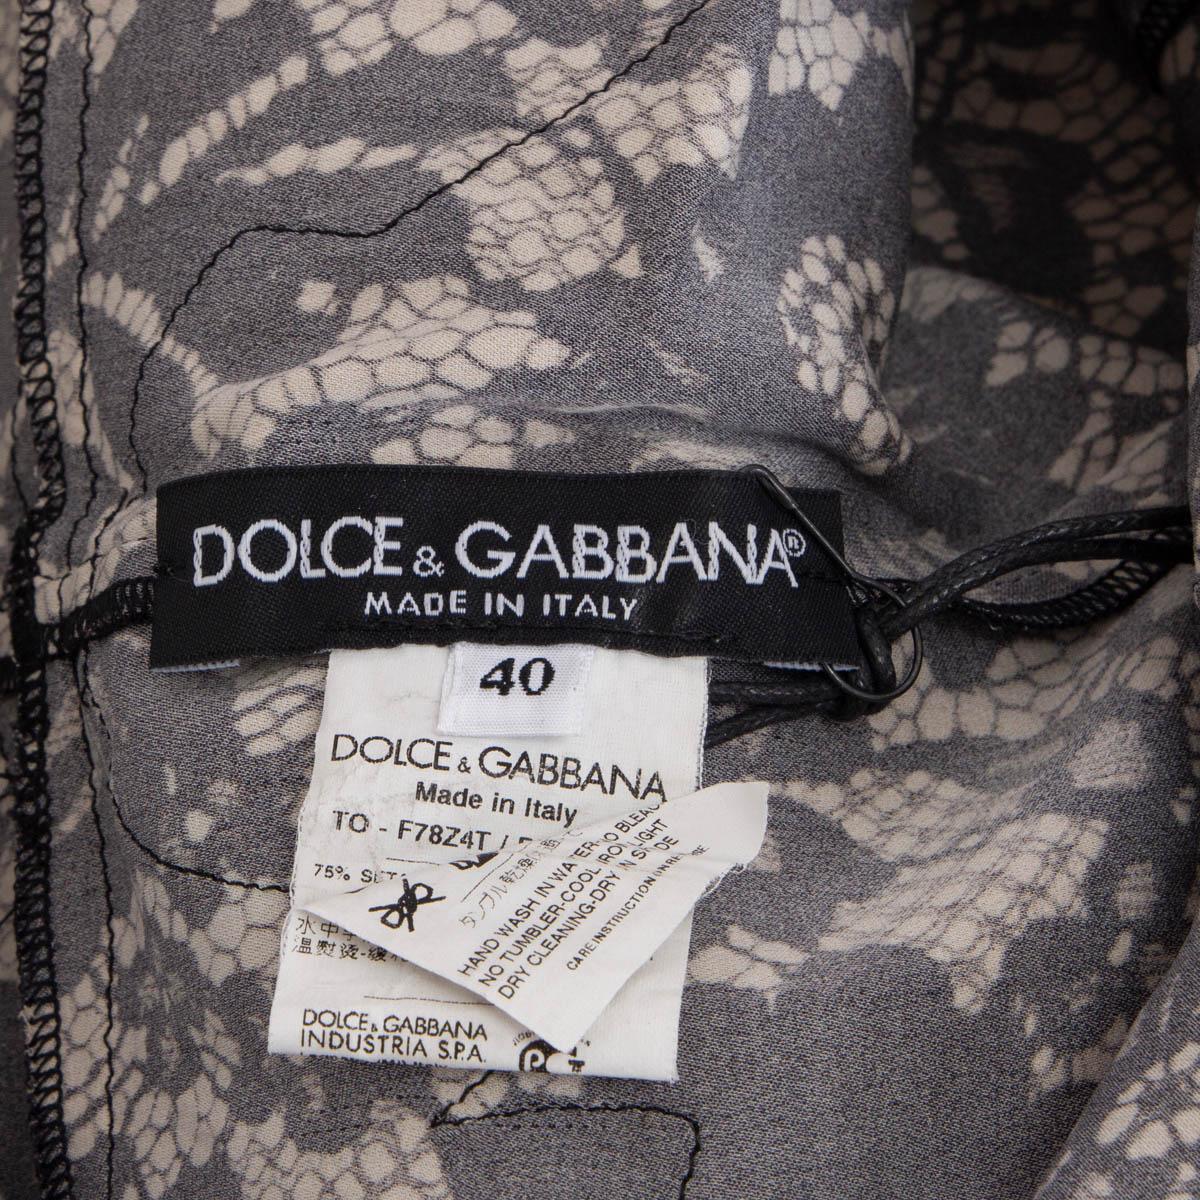 DOLCE & GABBANA black & nude LACE TANK TOP Shirt 40 S In Excellent Condition For Sale In Zürich, CH